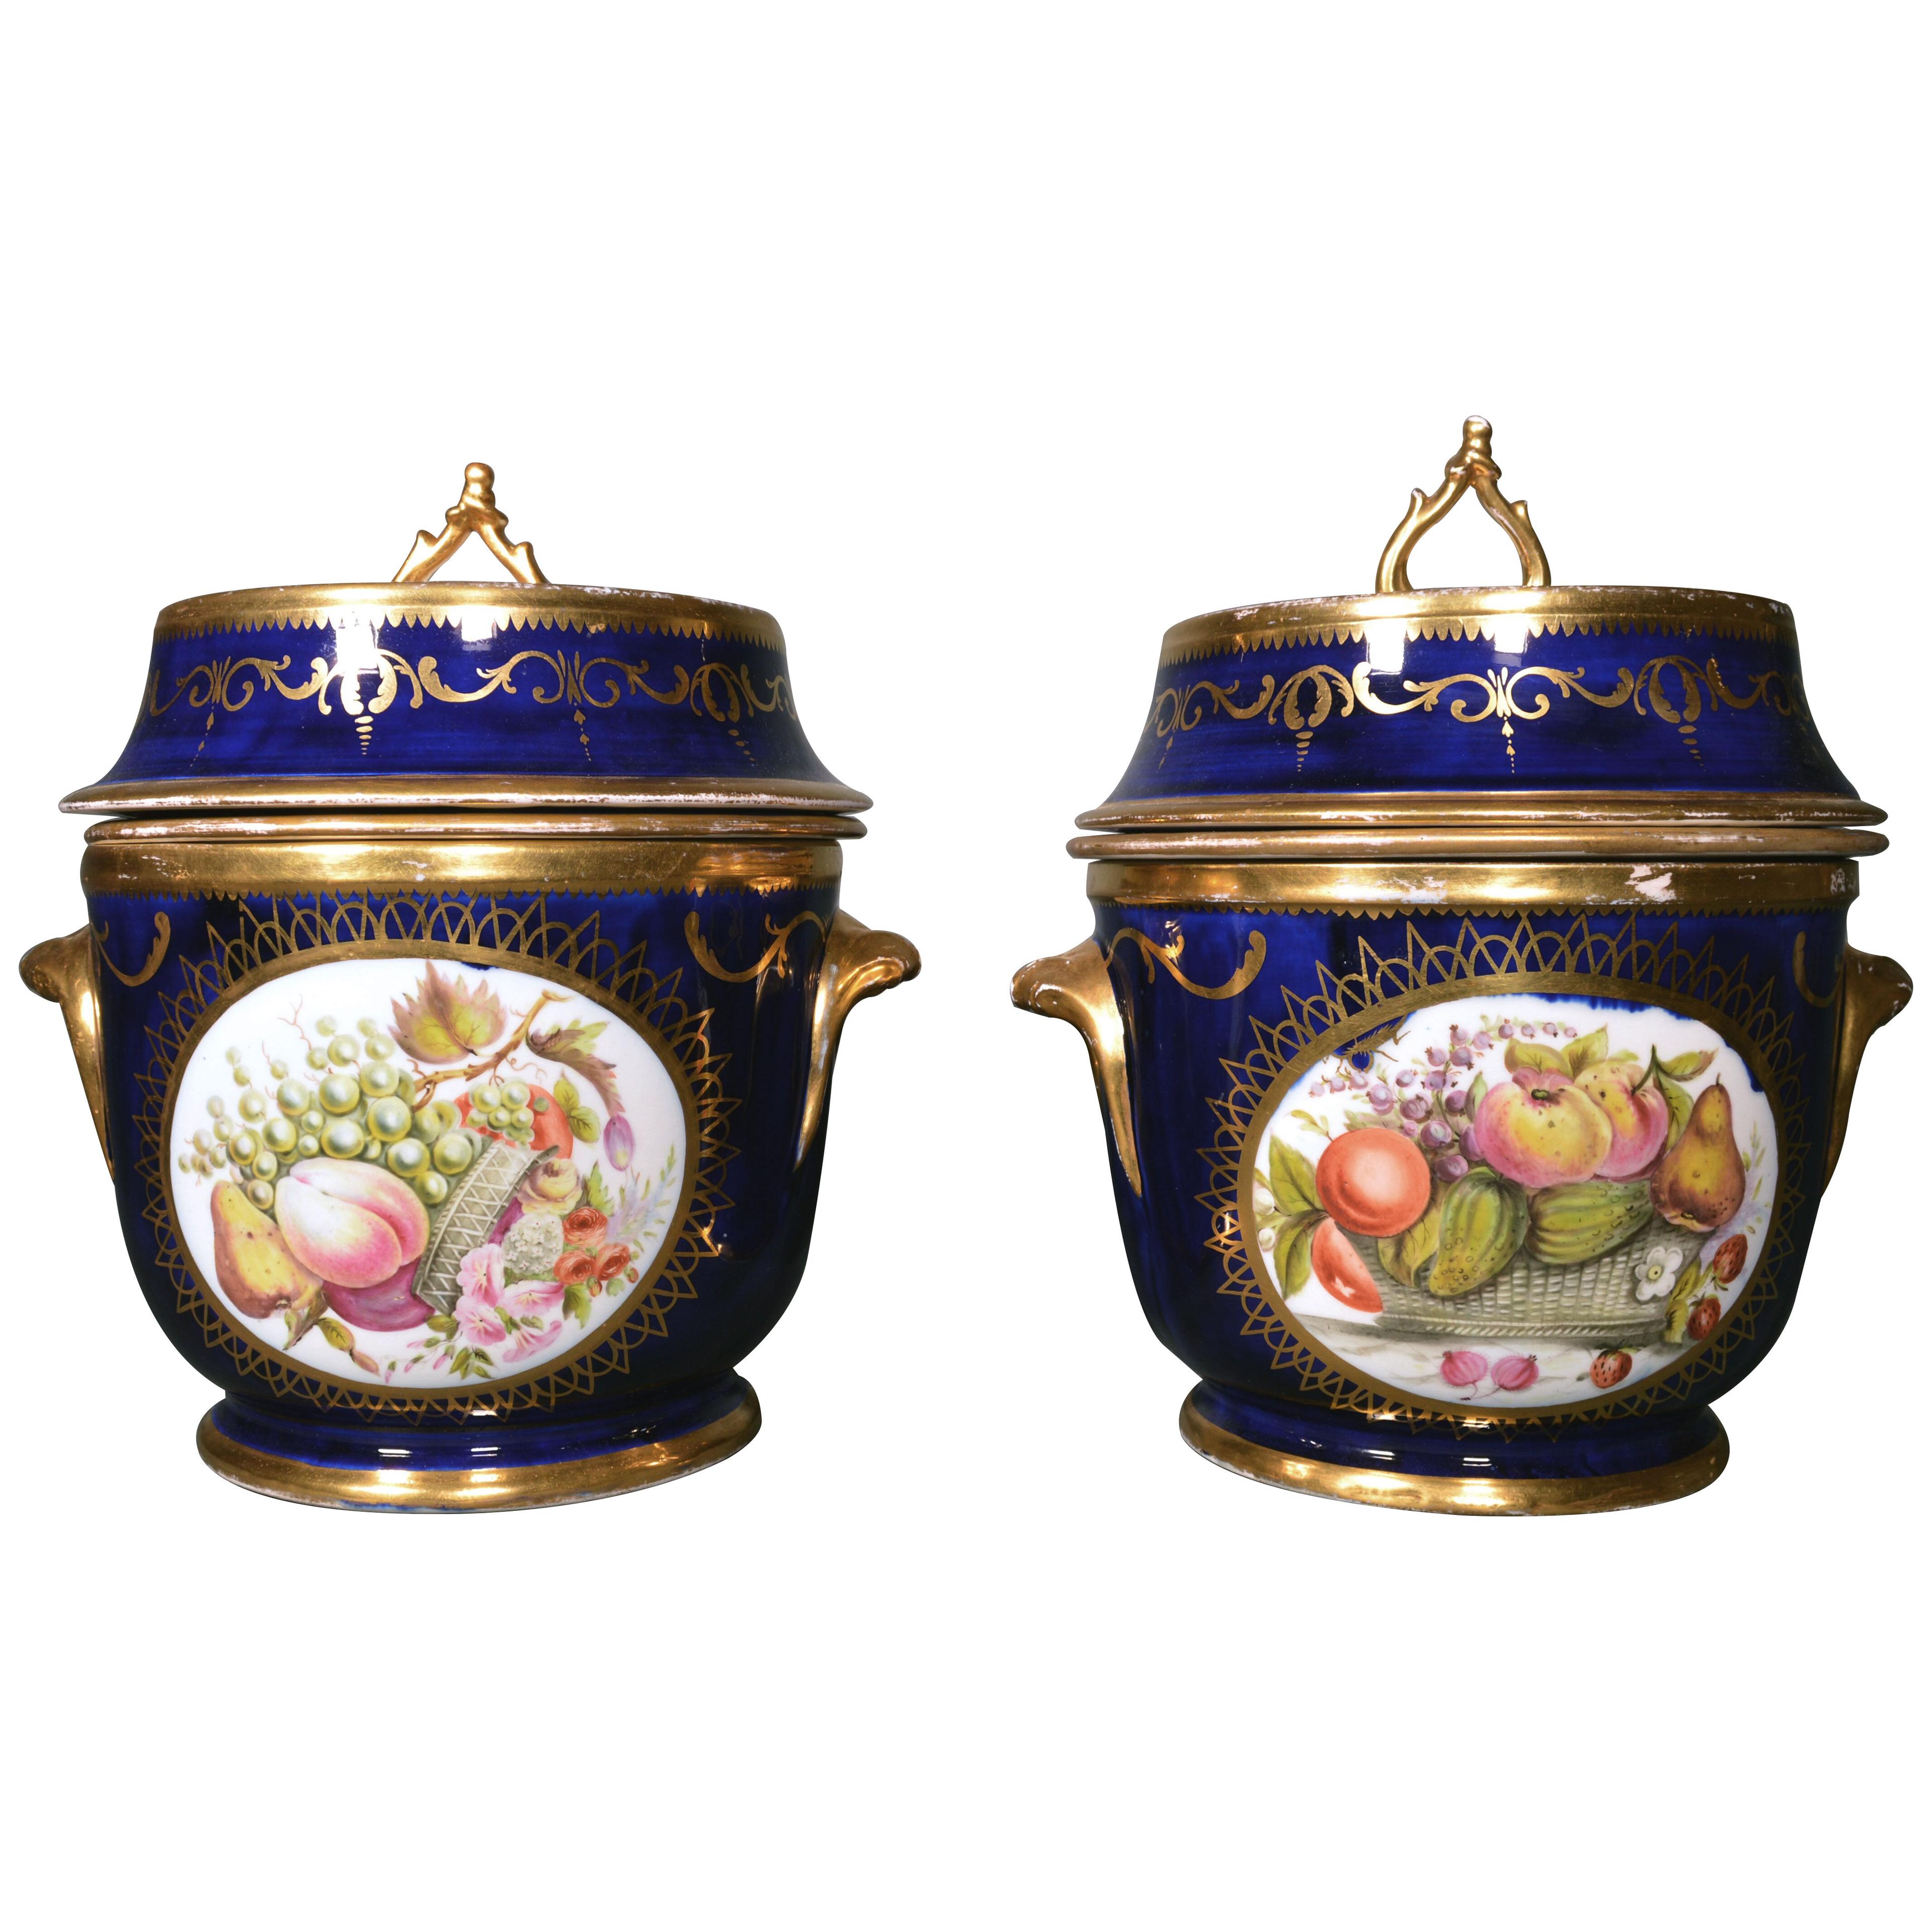 Coalport Porcelain Botanical Fruit Coolers, Covers, and Liners